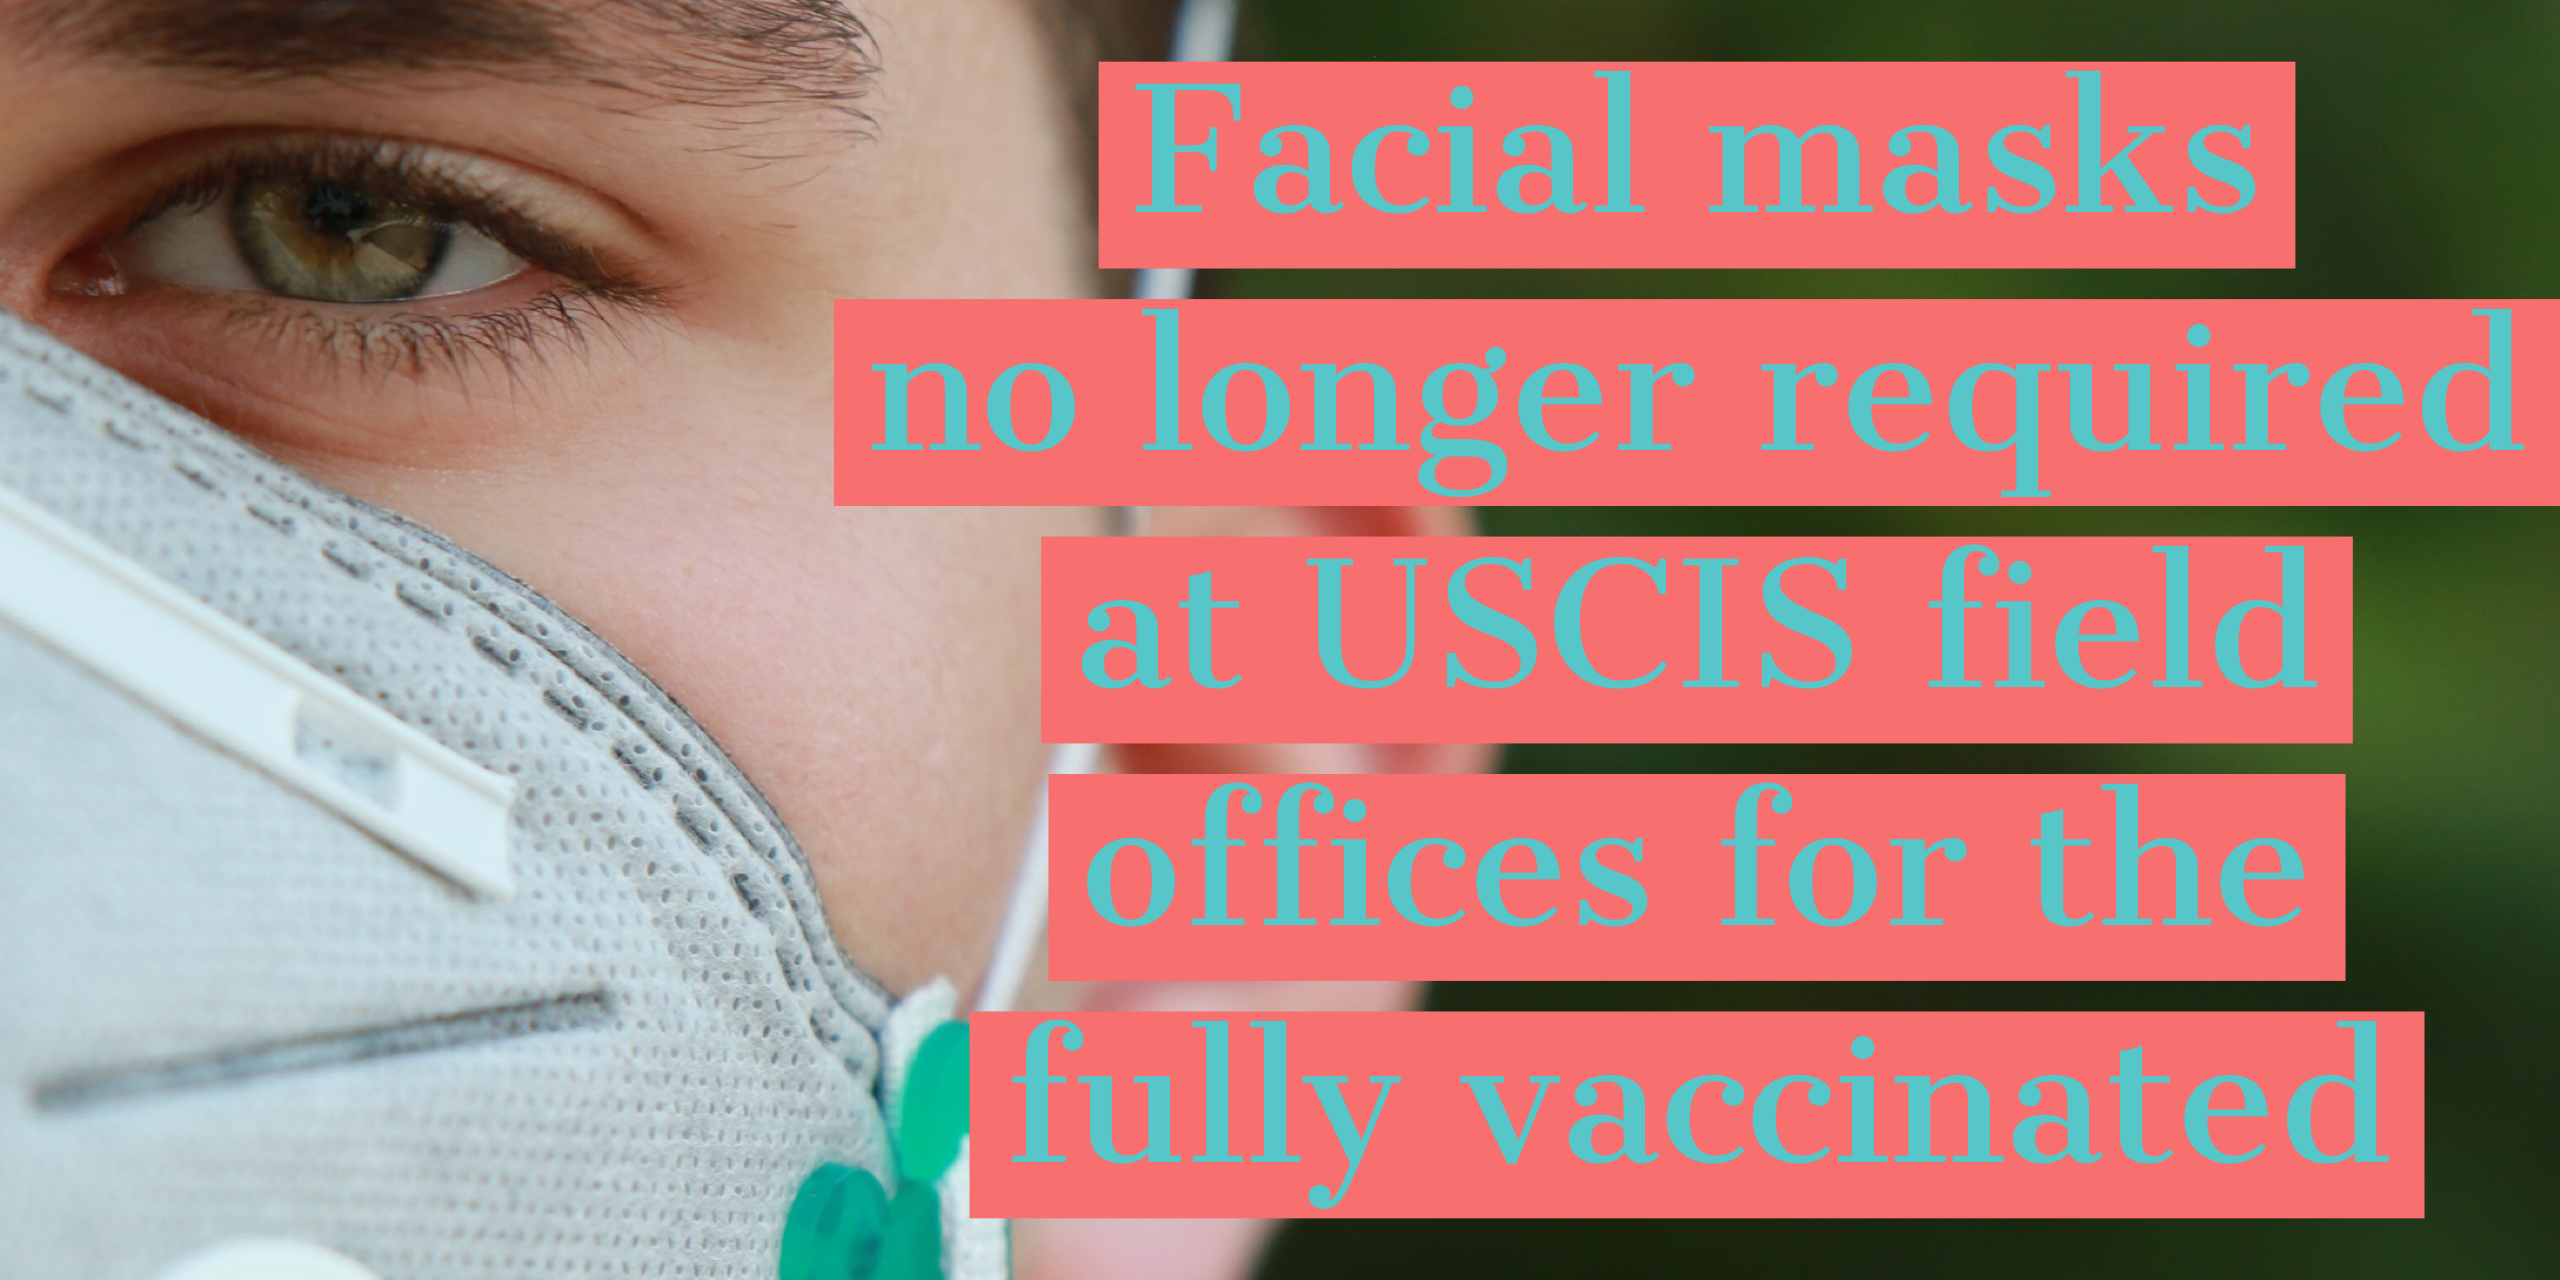 Facial Masks no longer required at USCIS field offices